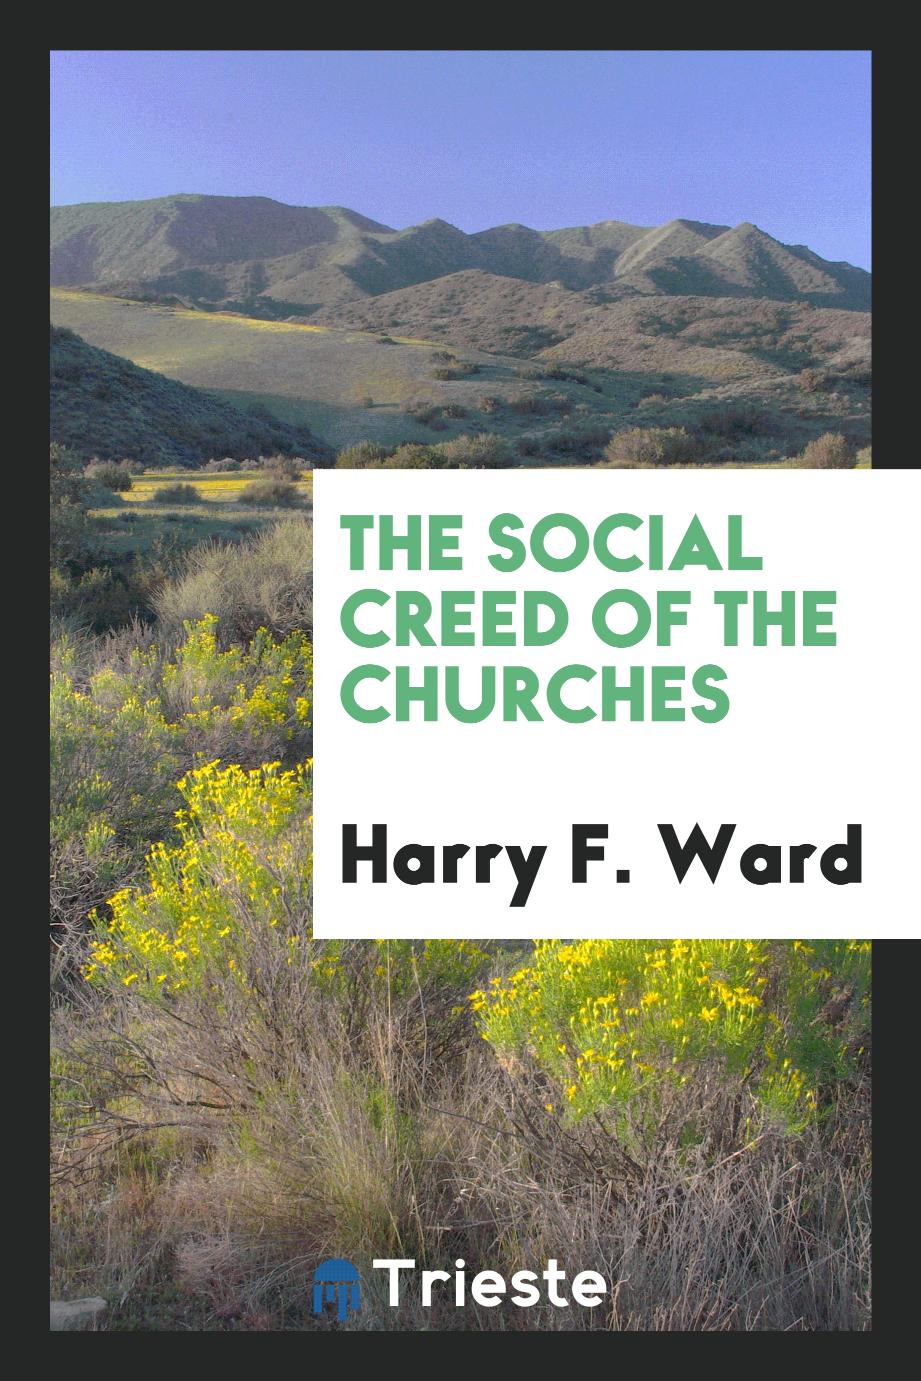 The Social Creed of the Churches